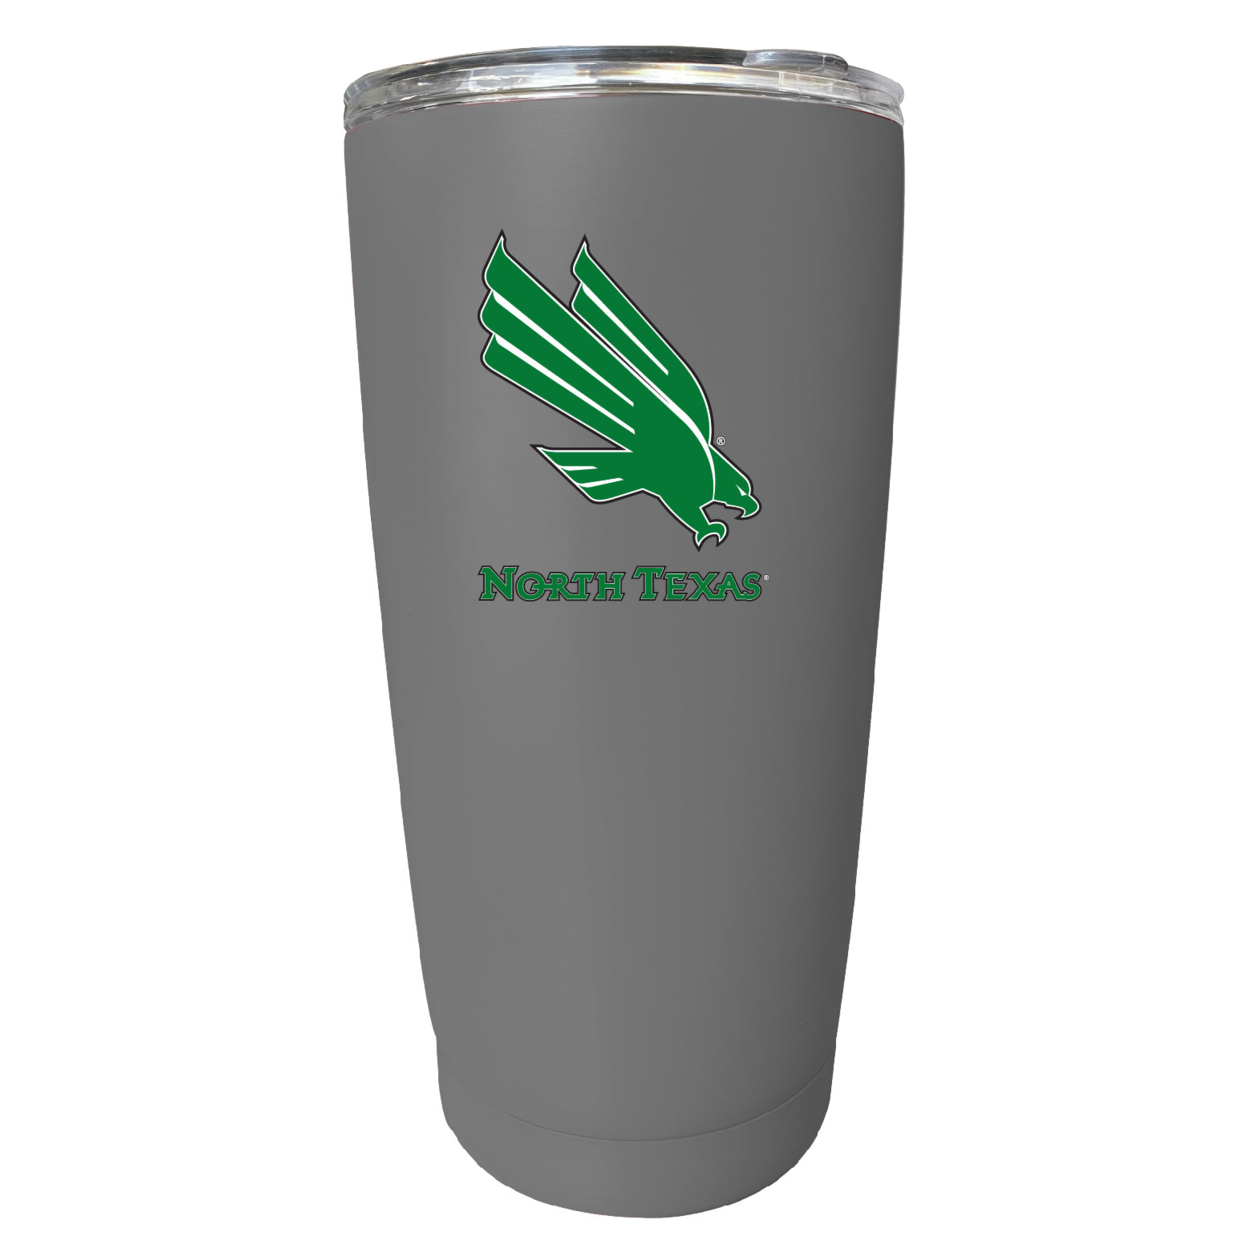 North Texas 16 Oz Stainless Steel Insulated Tumbler - Gray